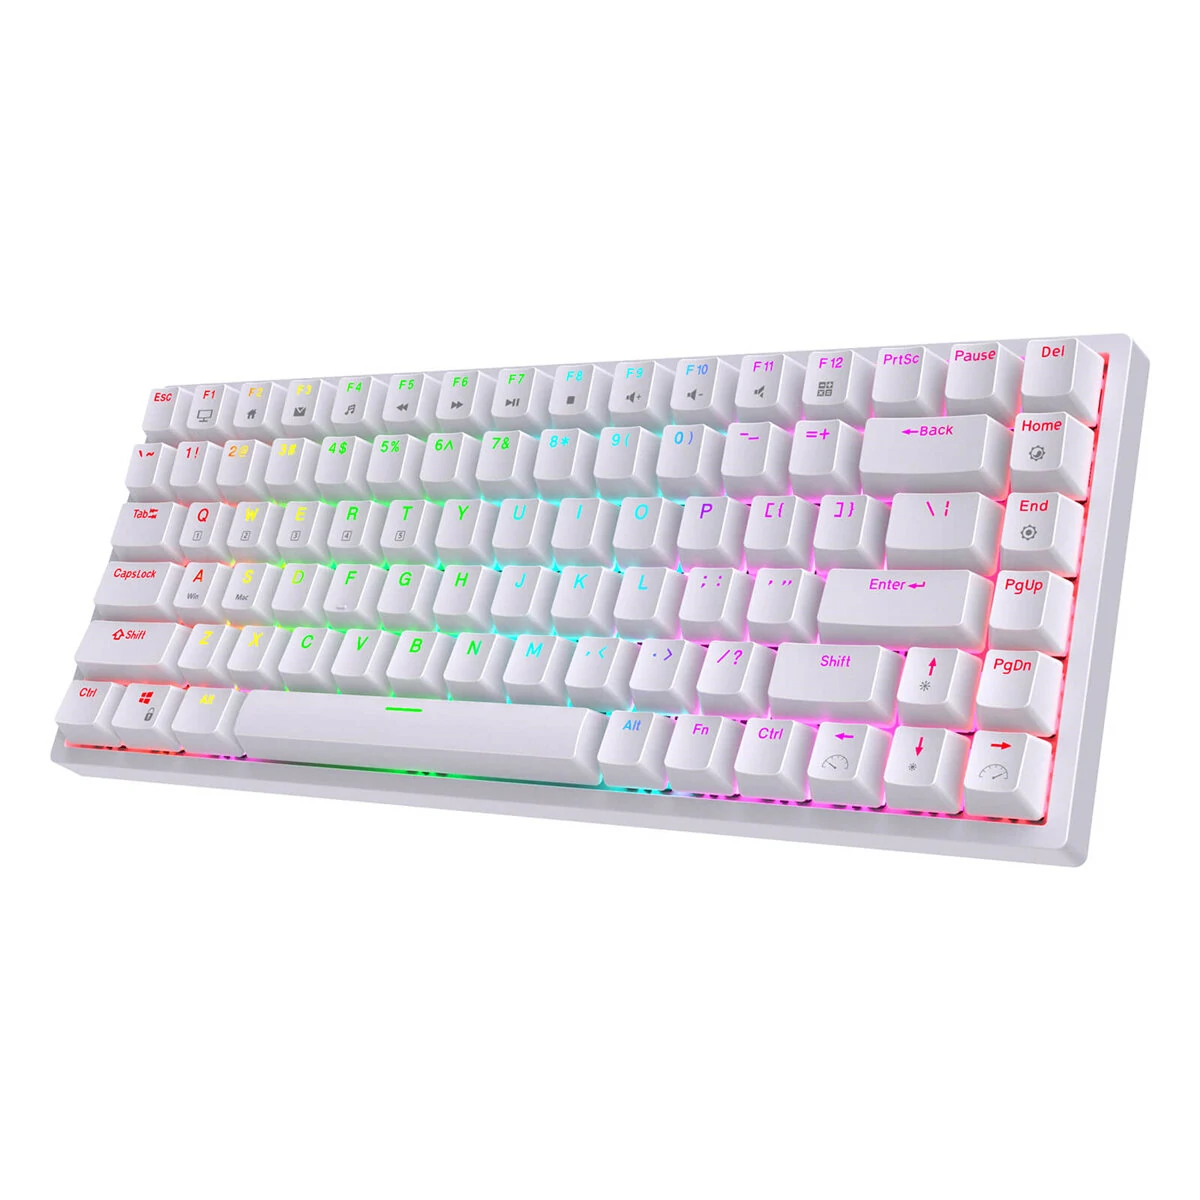 Royal Kludge RK84 Mechanical Keyboard 84 Keys Triple Mode Wireless bluetooth5.0 + 2.4Ghz + Type-C Wired Hot-swappable RK Switch USB Hub Rechargeable RGB Backlit ABS Keycaps Gaming Keyboard - White Blue Switch